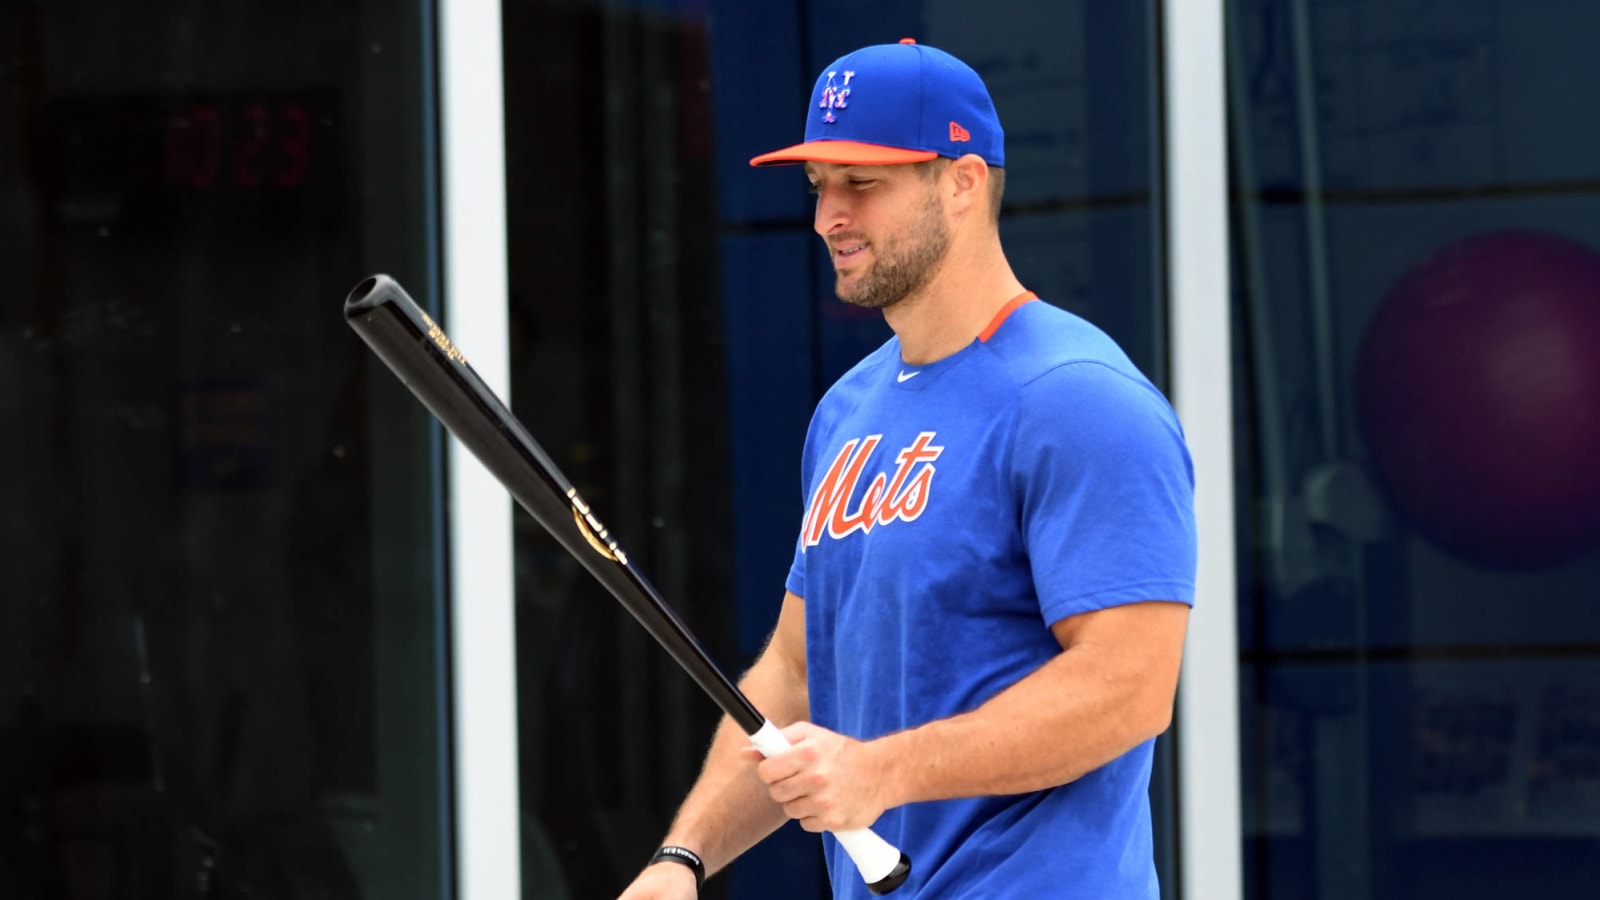 Tim Tebow had to give up No. 15 jersey because of Astros' cheating scandal